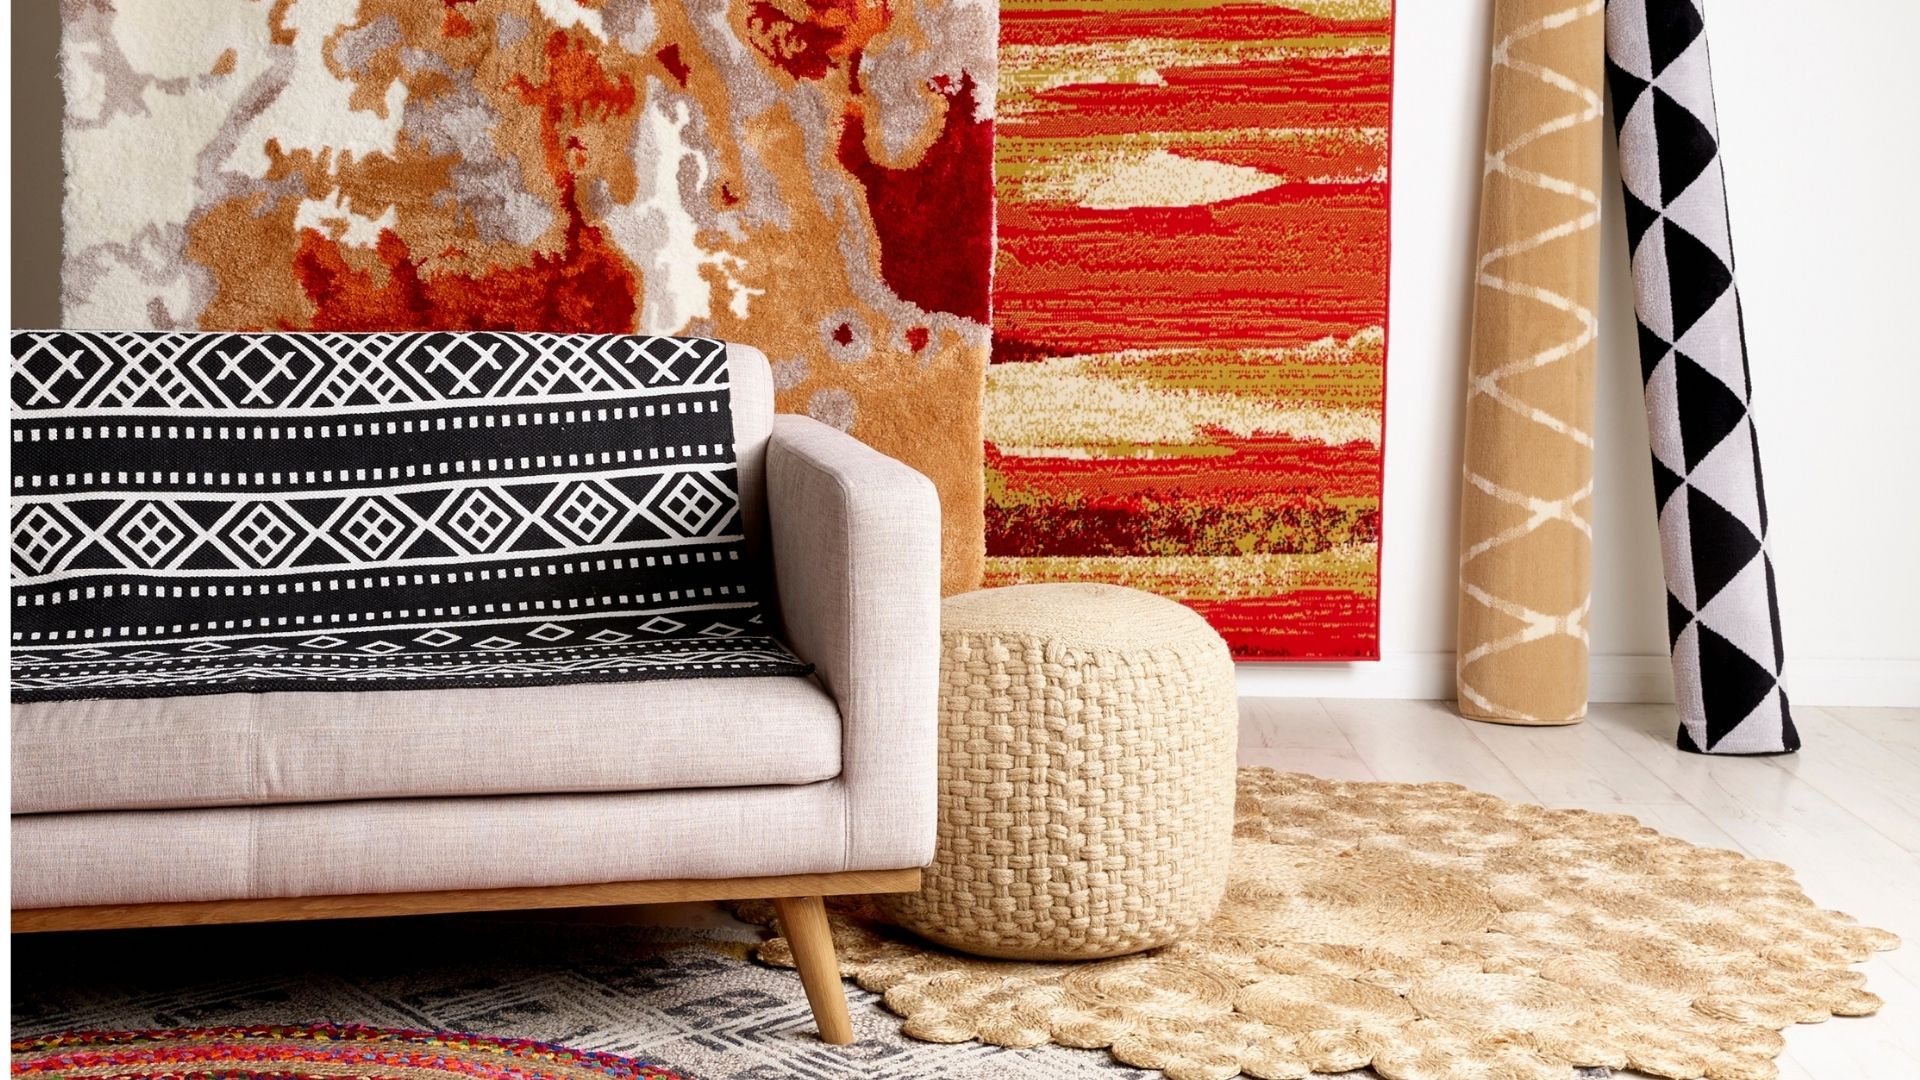 Clean & Care For Rugs